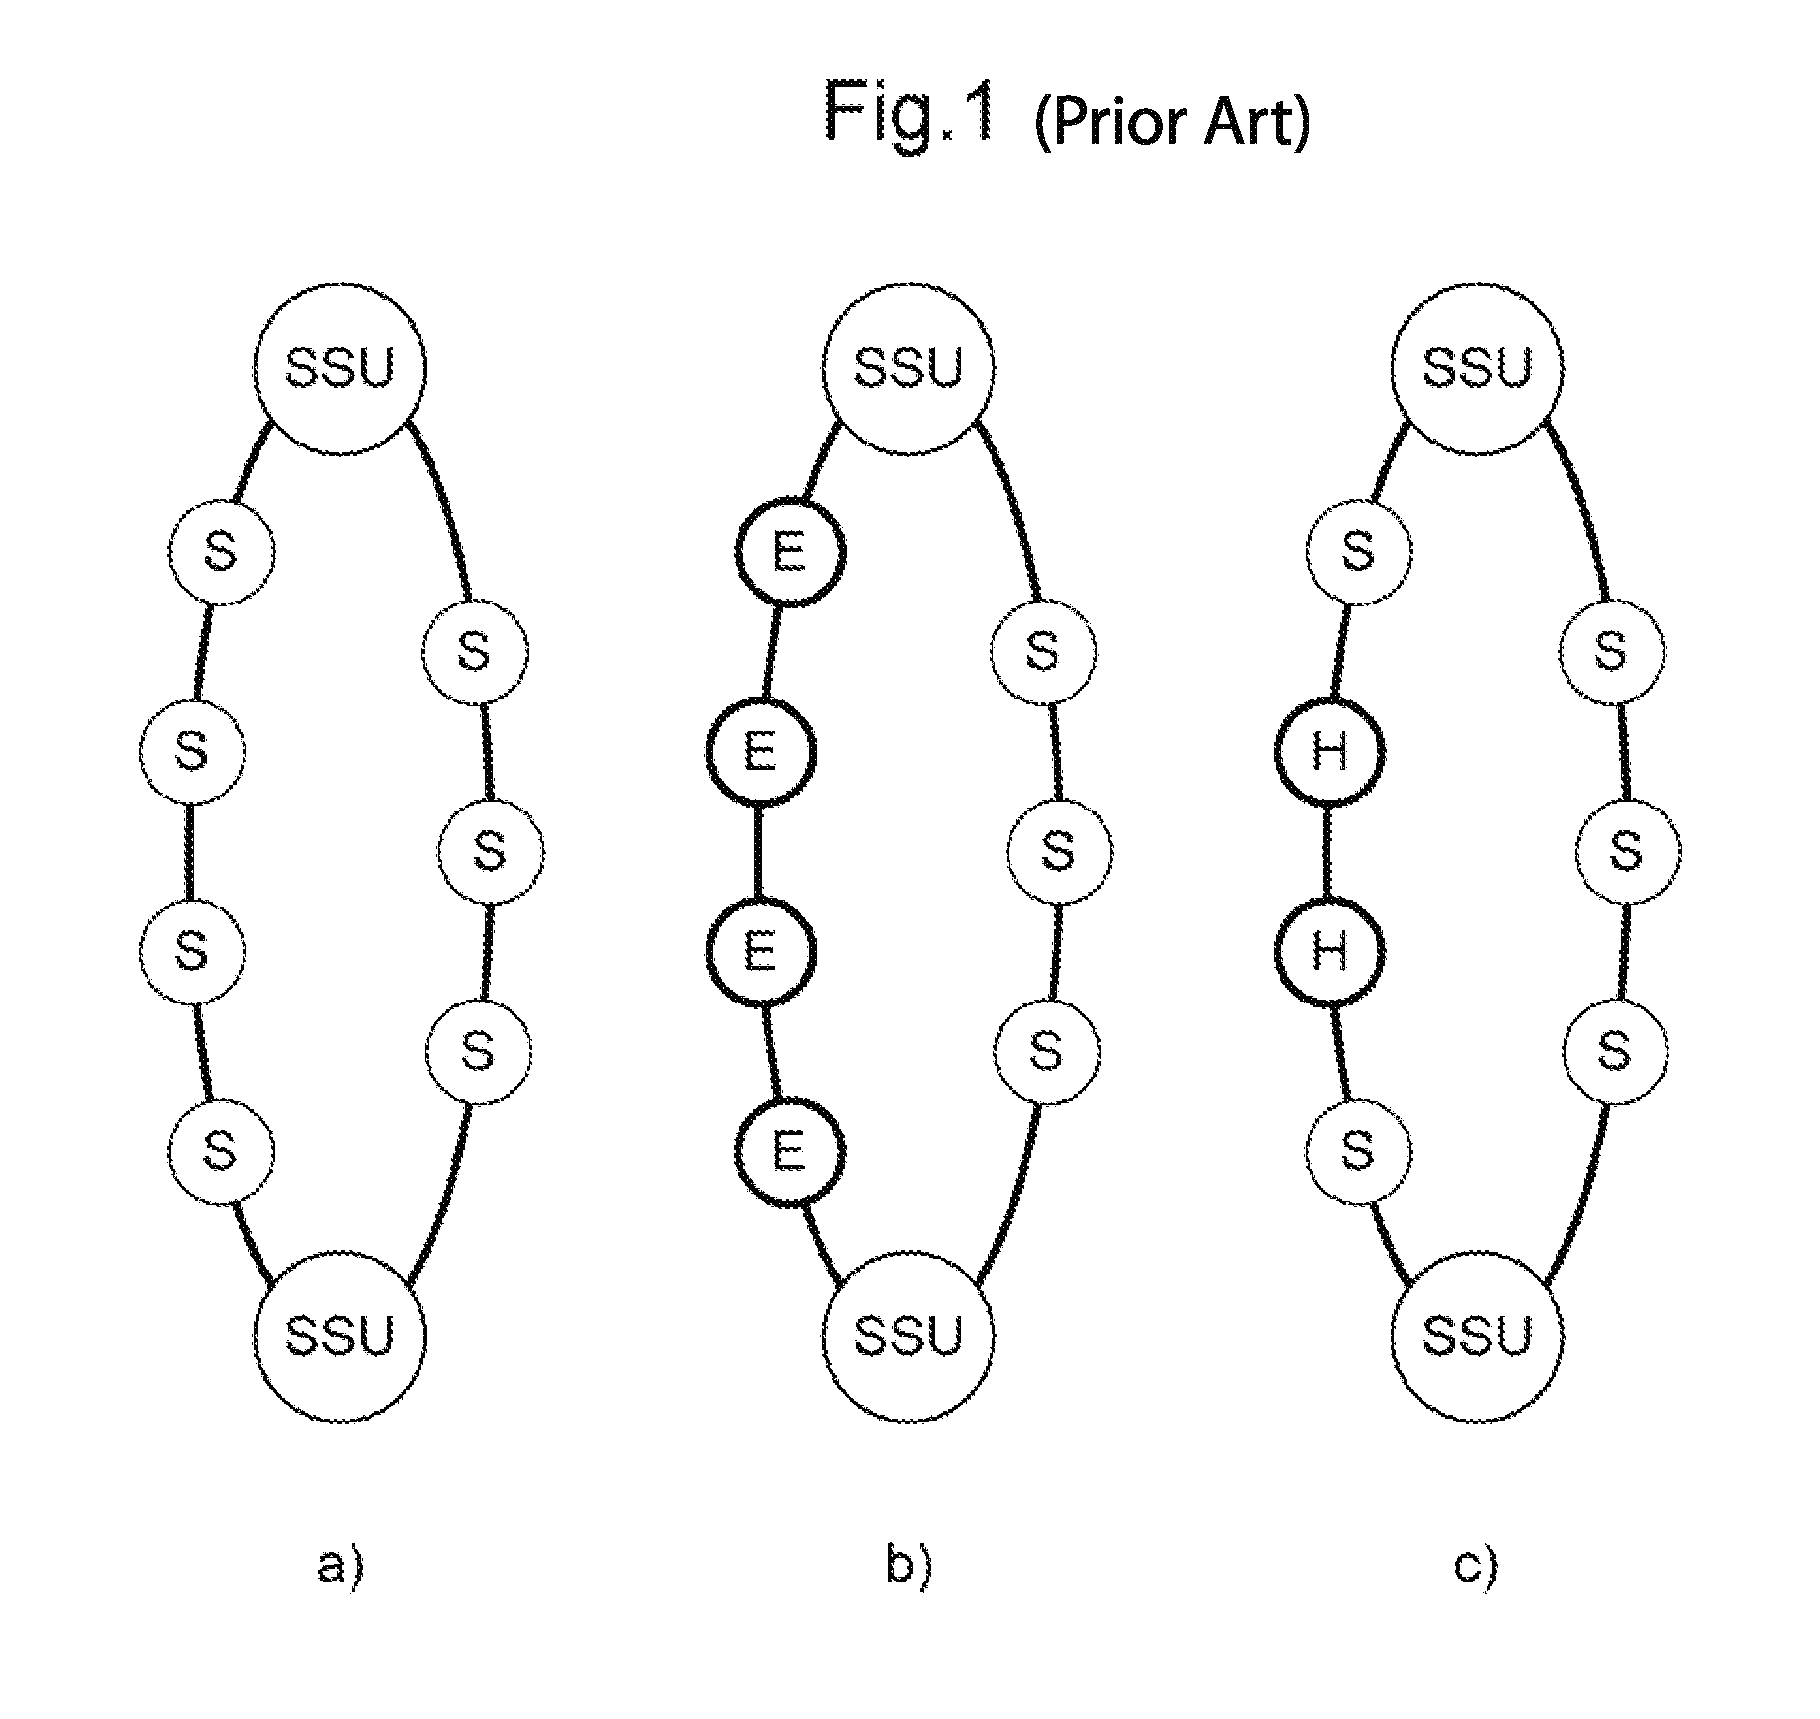 Method for distributing time within synchronous ethernet and SONET/SDH domains